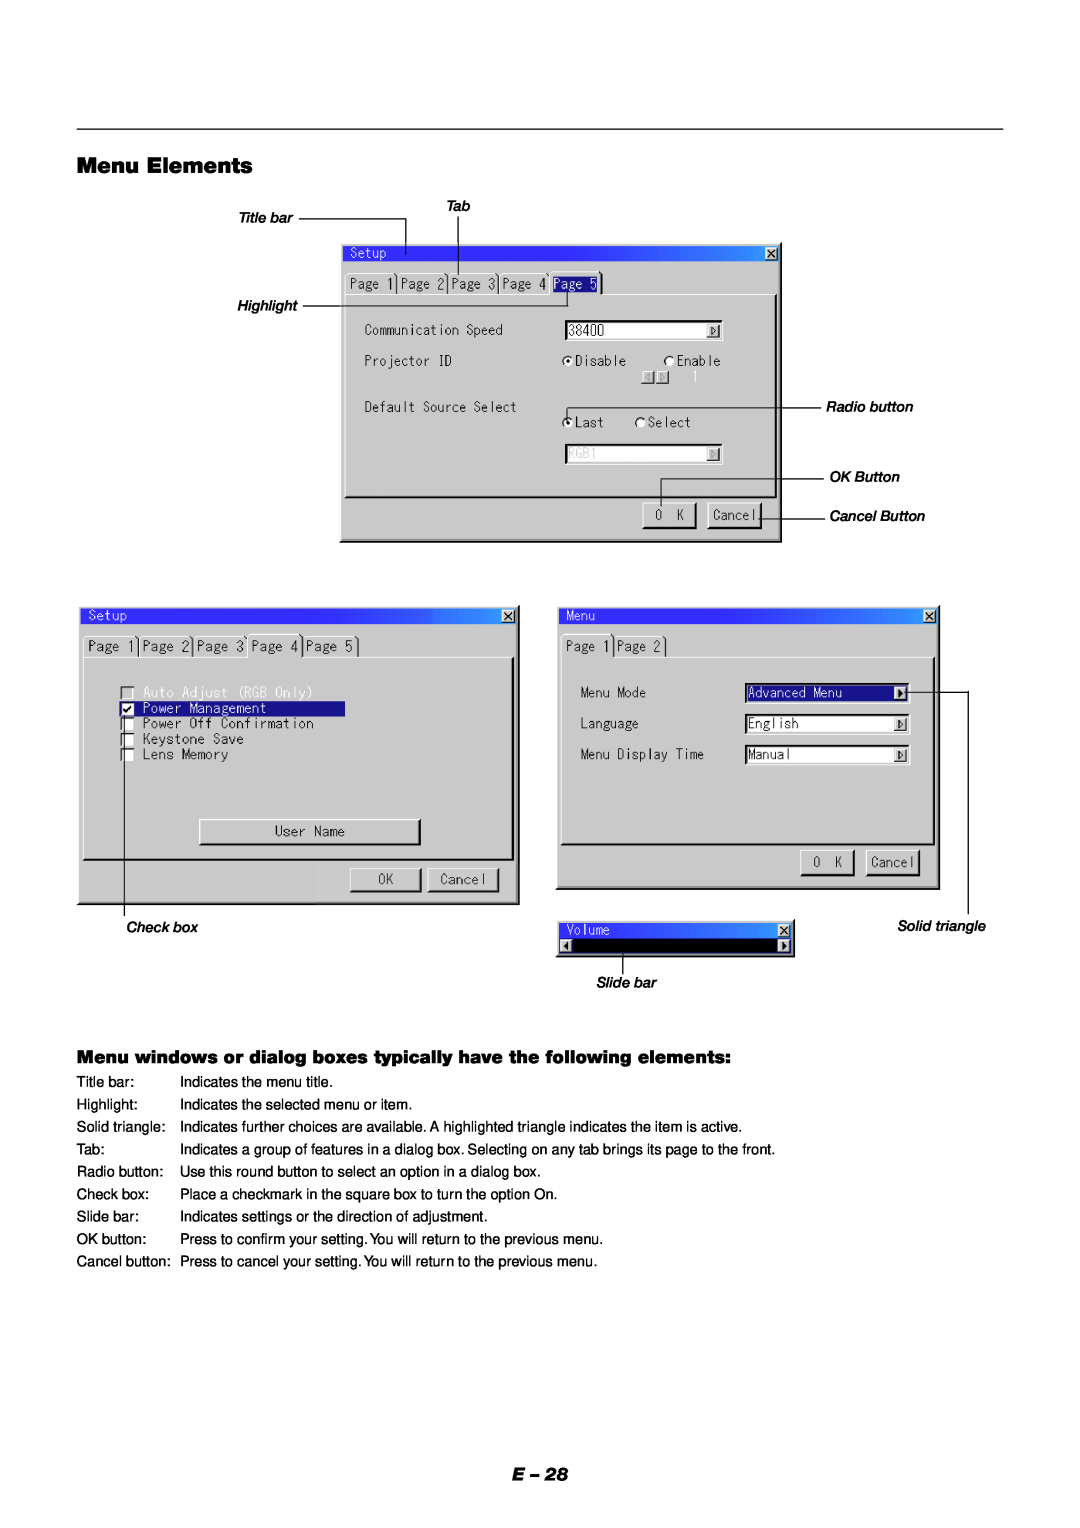 NEC XT9000 user manual Menu Elements, Menu windows or dialog boxes typically have the following elements 